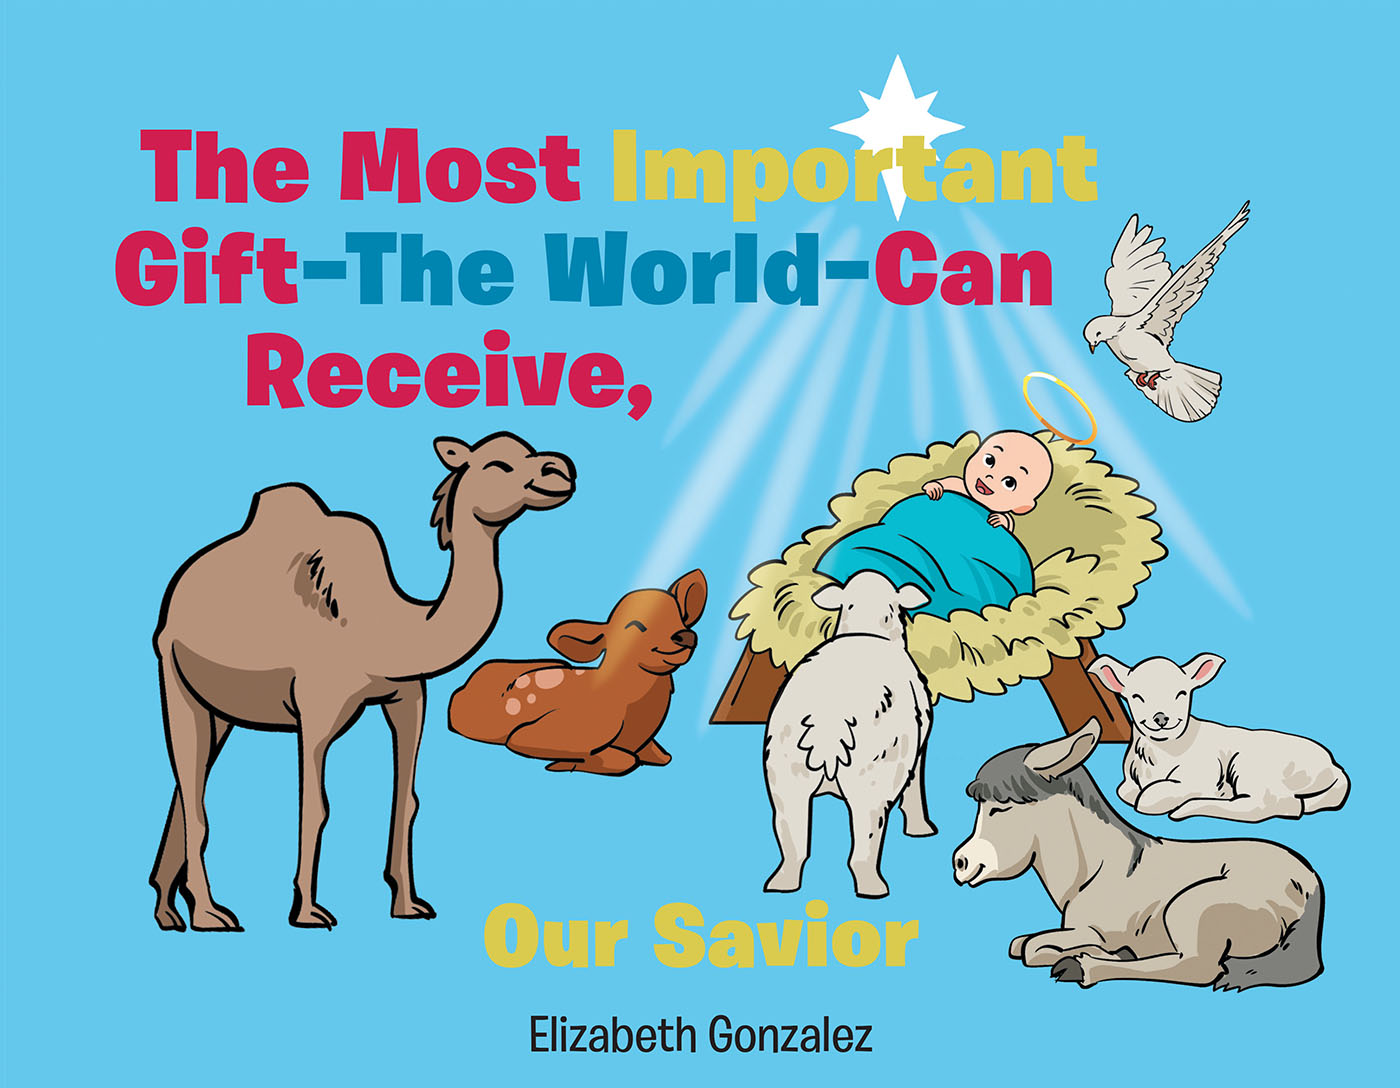 Elizabeth Gonzalez’s Newly Released “The Most Important Gift The World Can Receive, Our Savior” is a Spirit-Filled Study of Christ